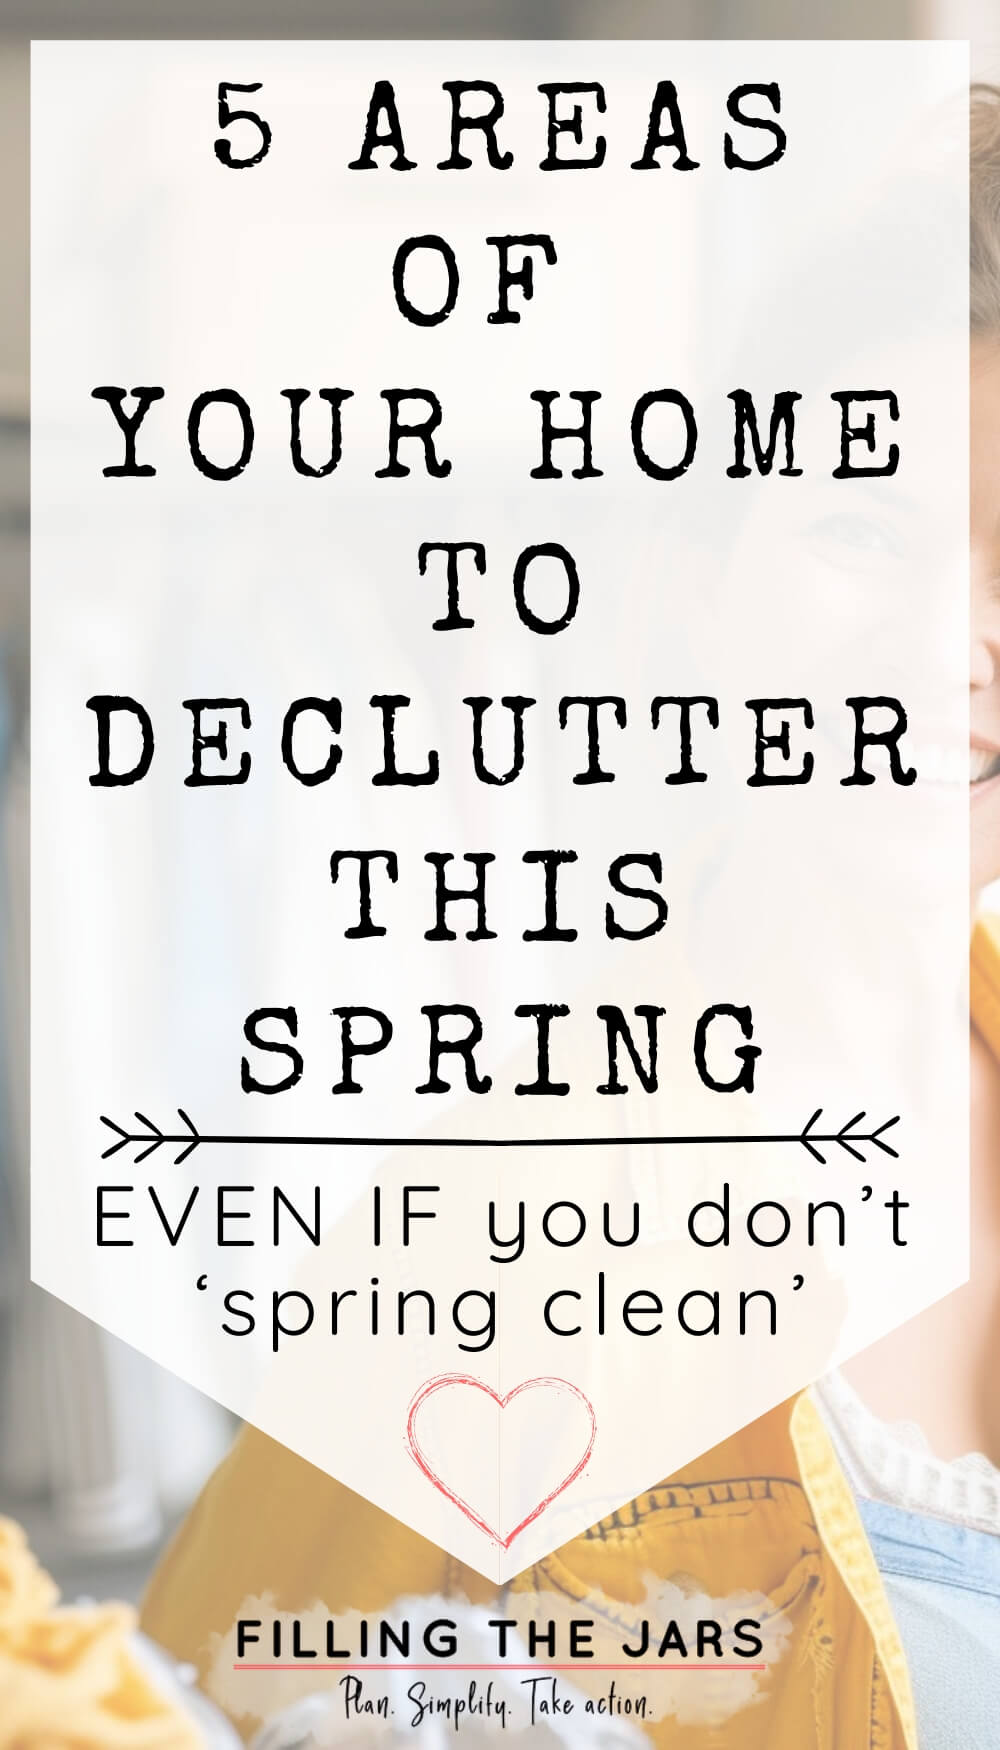 Pinterest image with text '5 areas of your home to declutter this spring' on white background over faded image of smiling woman who is ready to declutter.